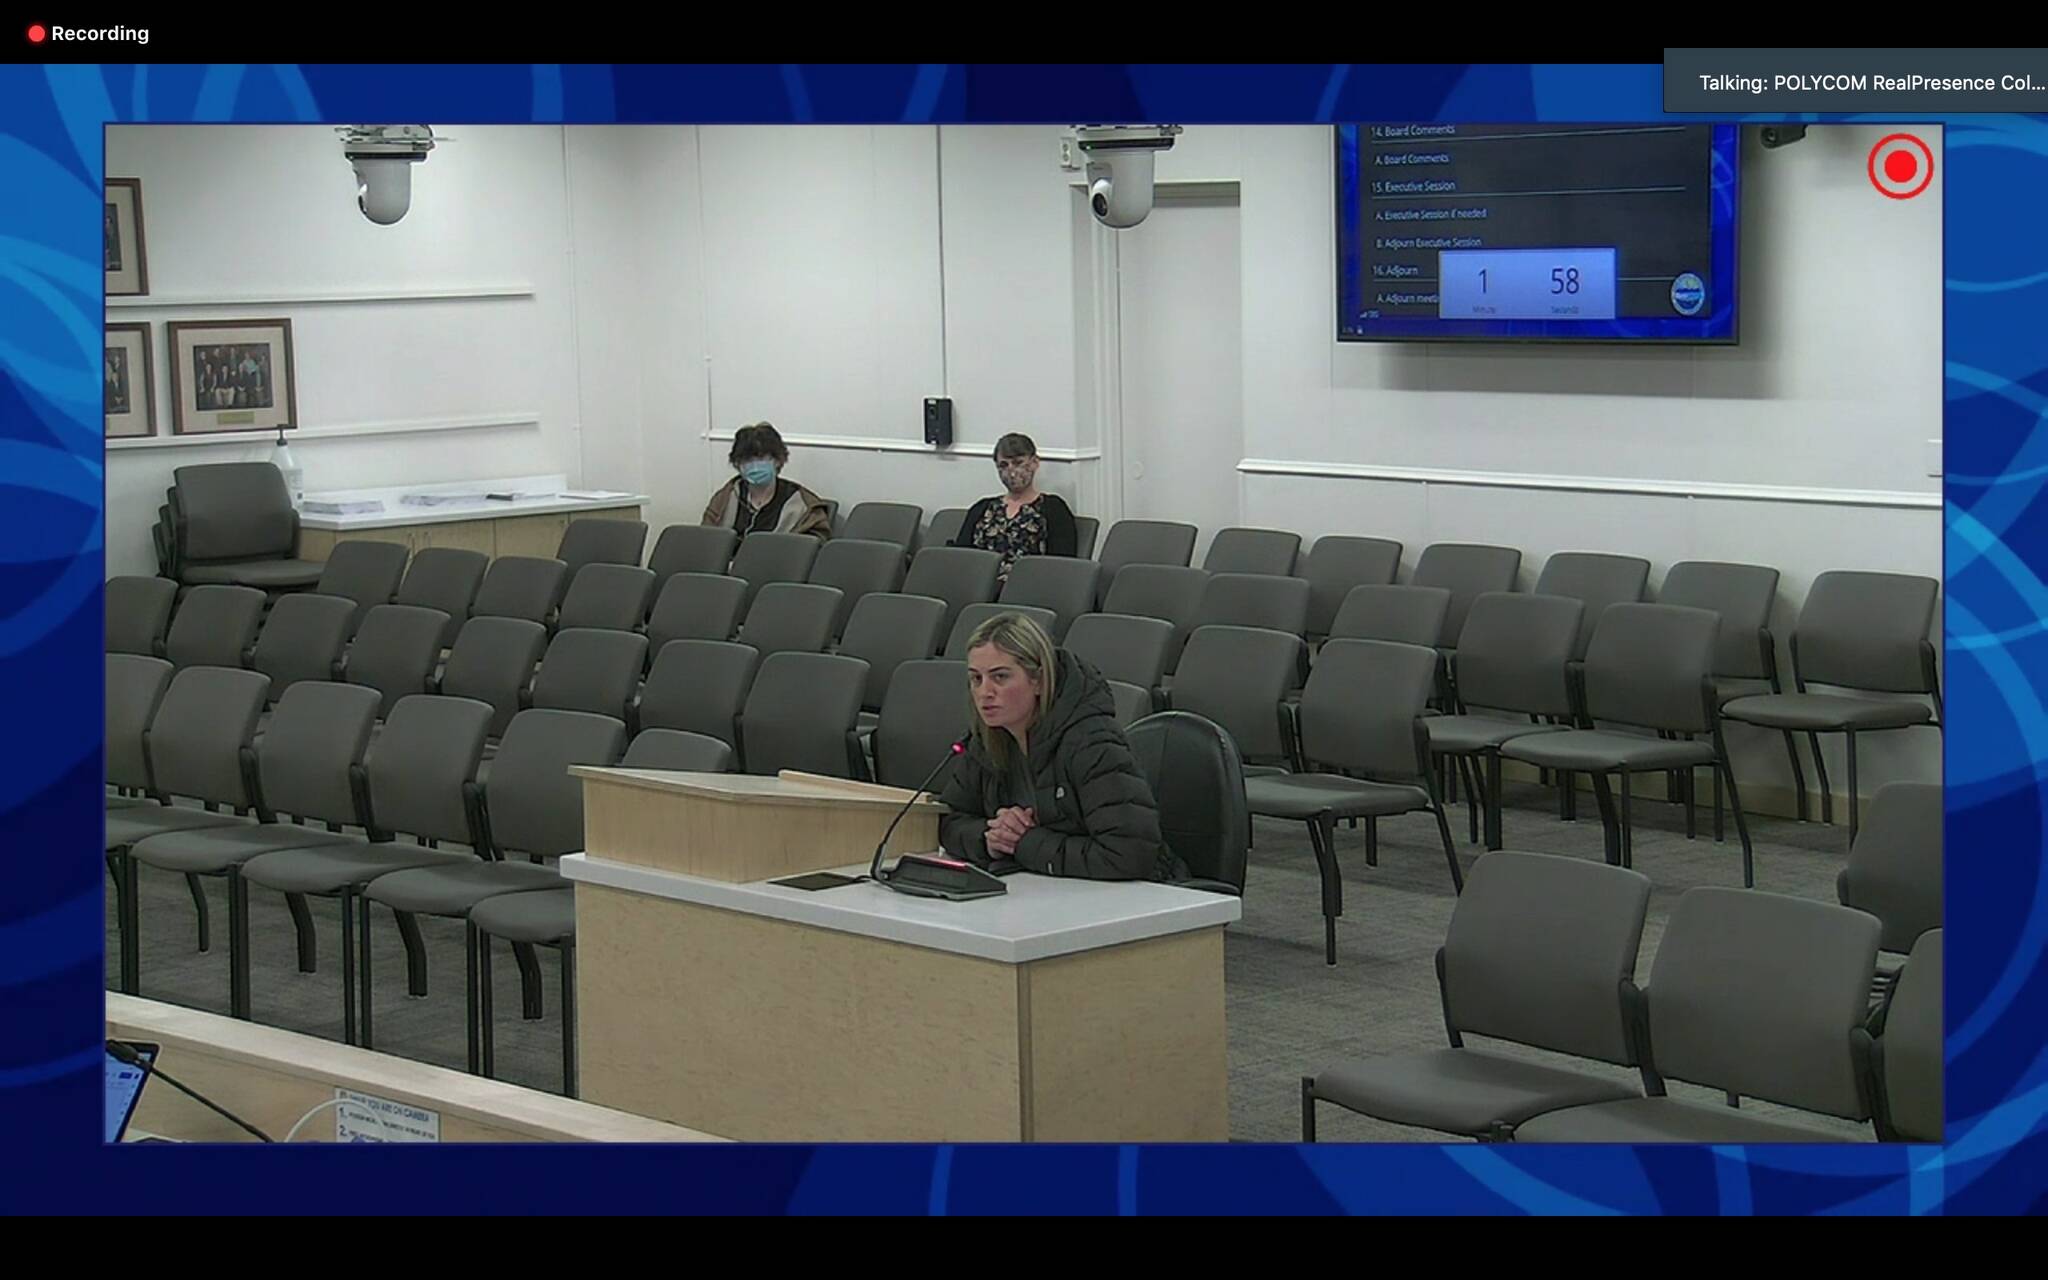 Teea Winger testifies in opposition to universal masking in schools during a meeting of the Kenai Peninsula Borough Board of Education on Monday, Feb. 7, 2022 in Soldotna, Alaska. (Screenshot)